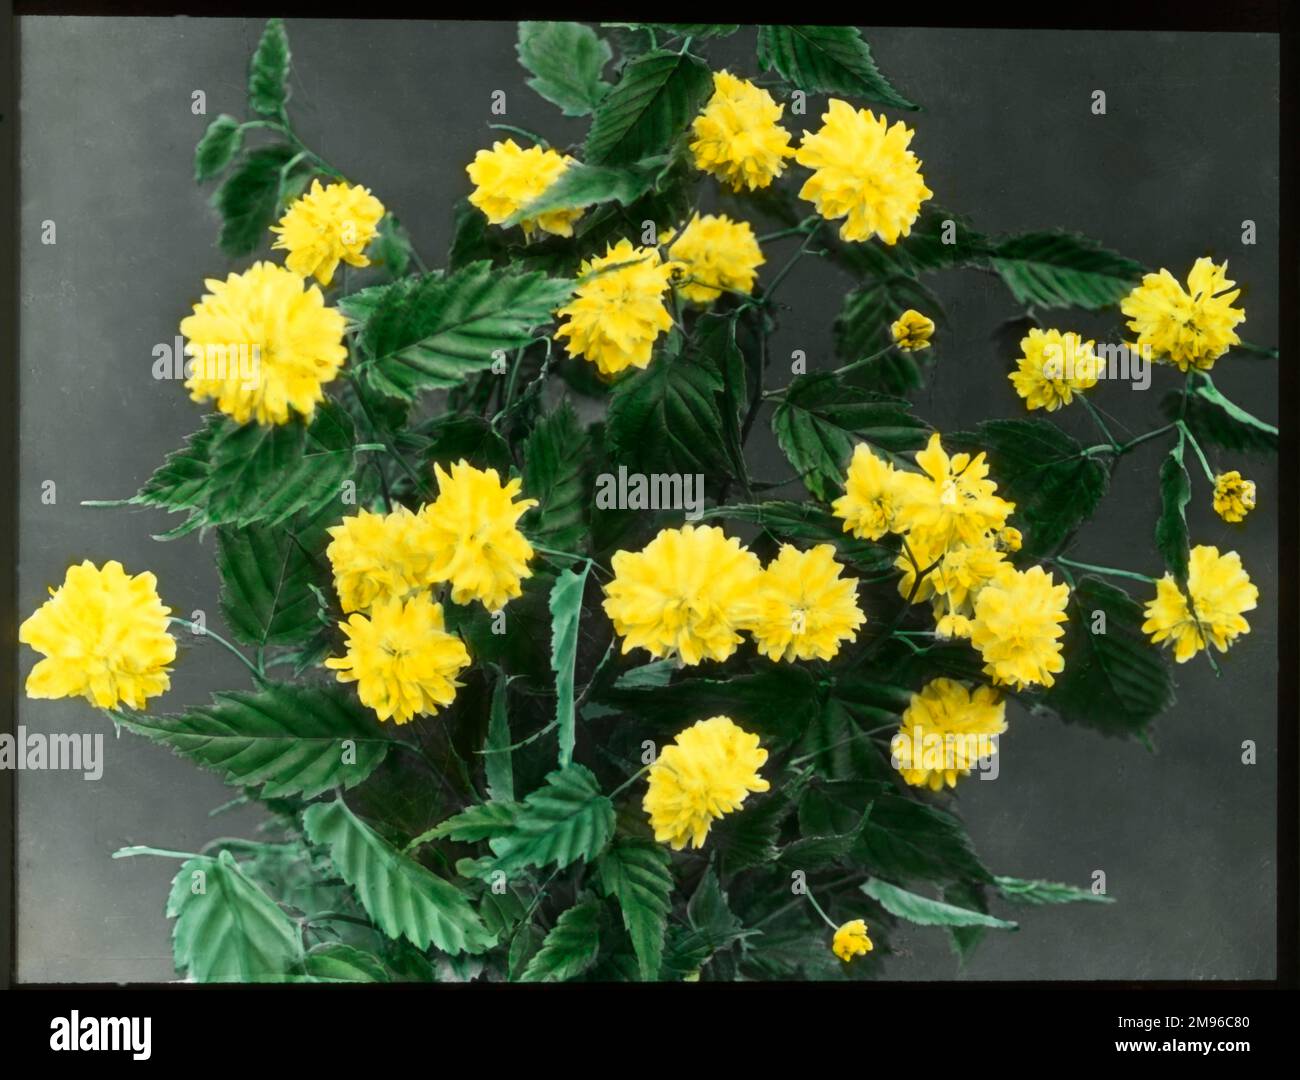 Kerria Japonica (Japanese Yellow Rose), a shrub of the Rosaceae family with bright yellow flowers, native to China, Japan and Korea.  The one seen here is of the Pleniflora variety, with many petals on each flower. Stock Photo